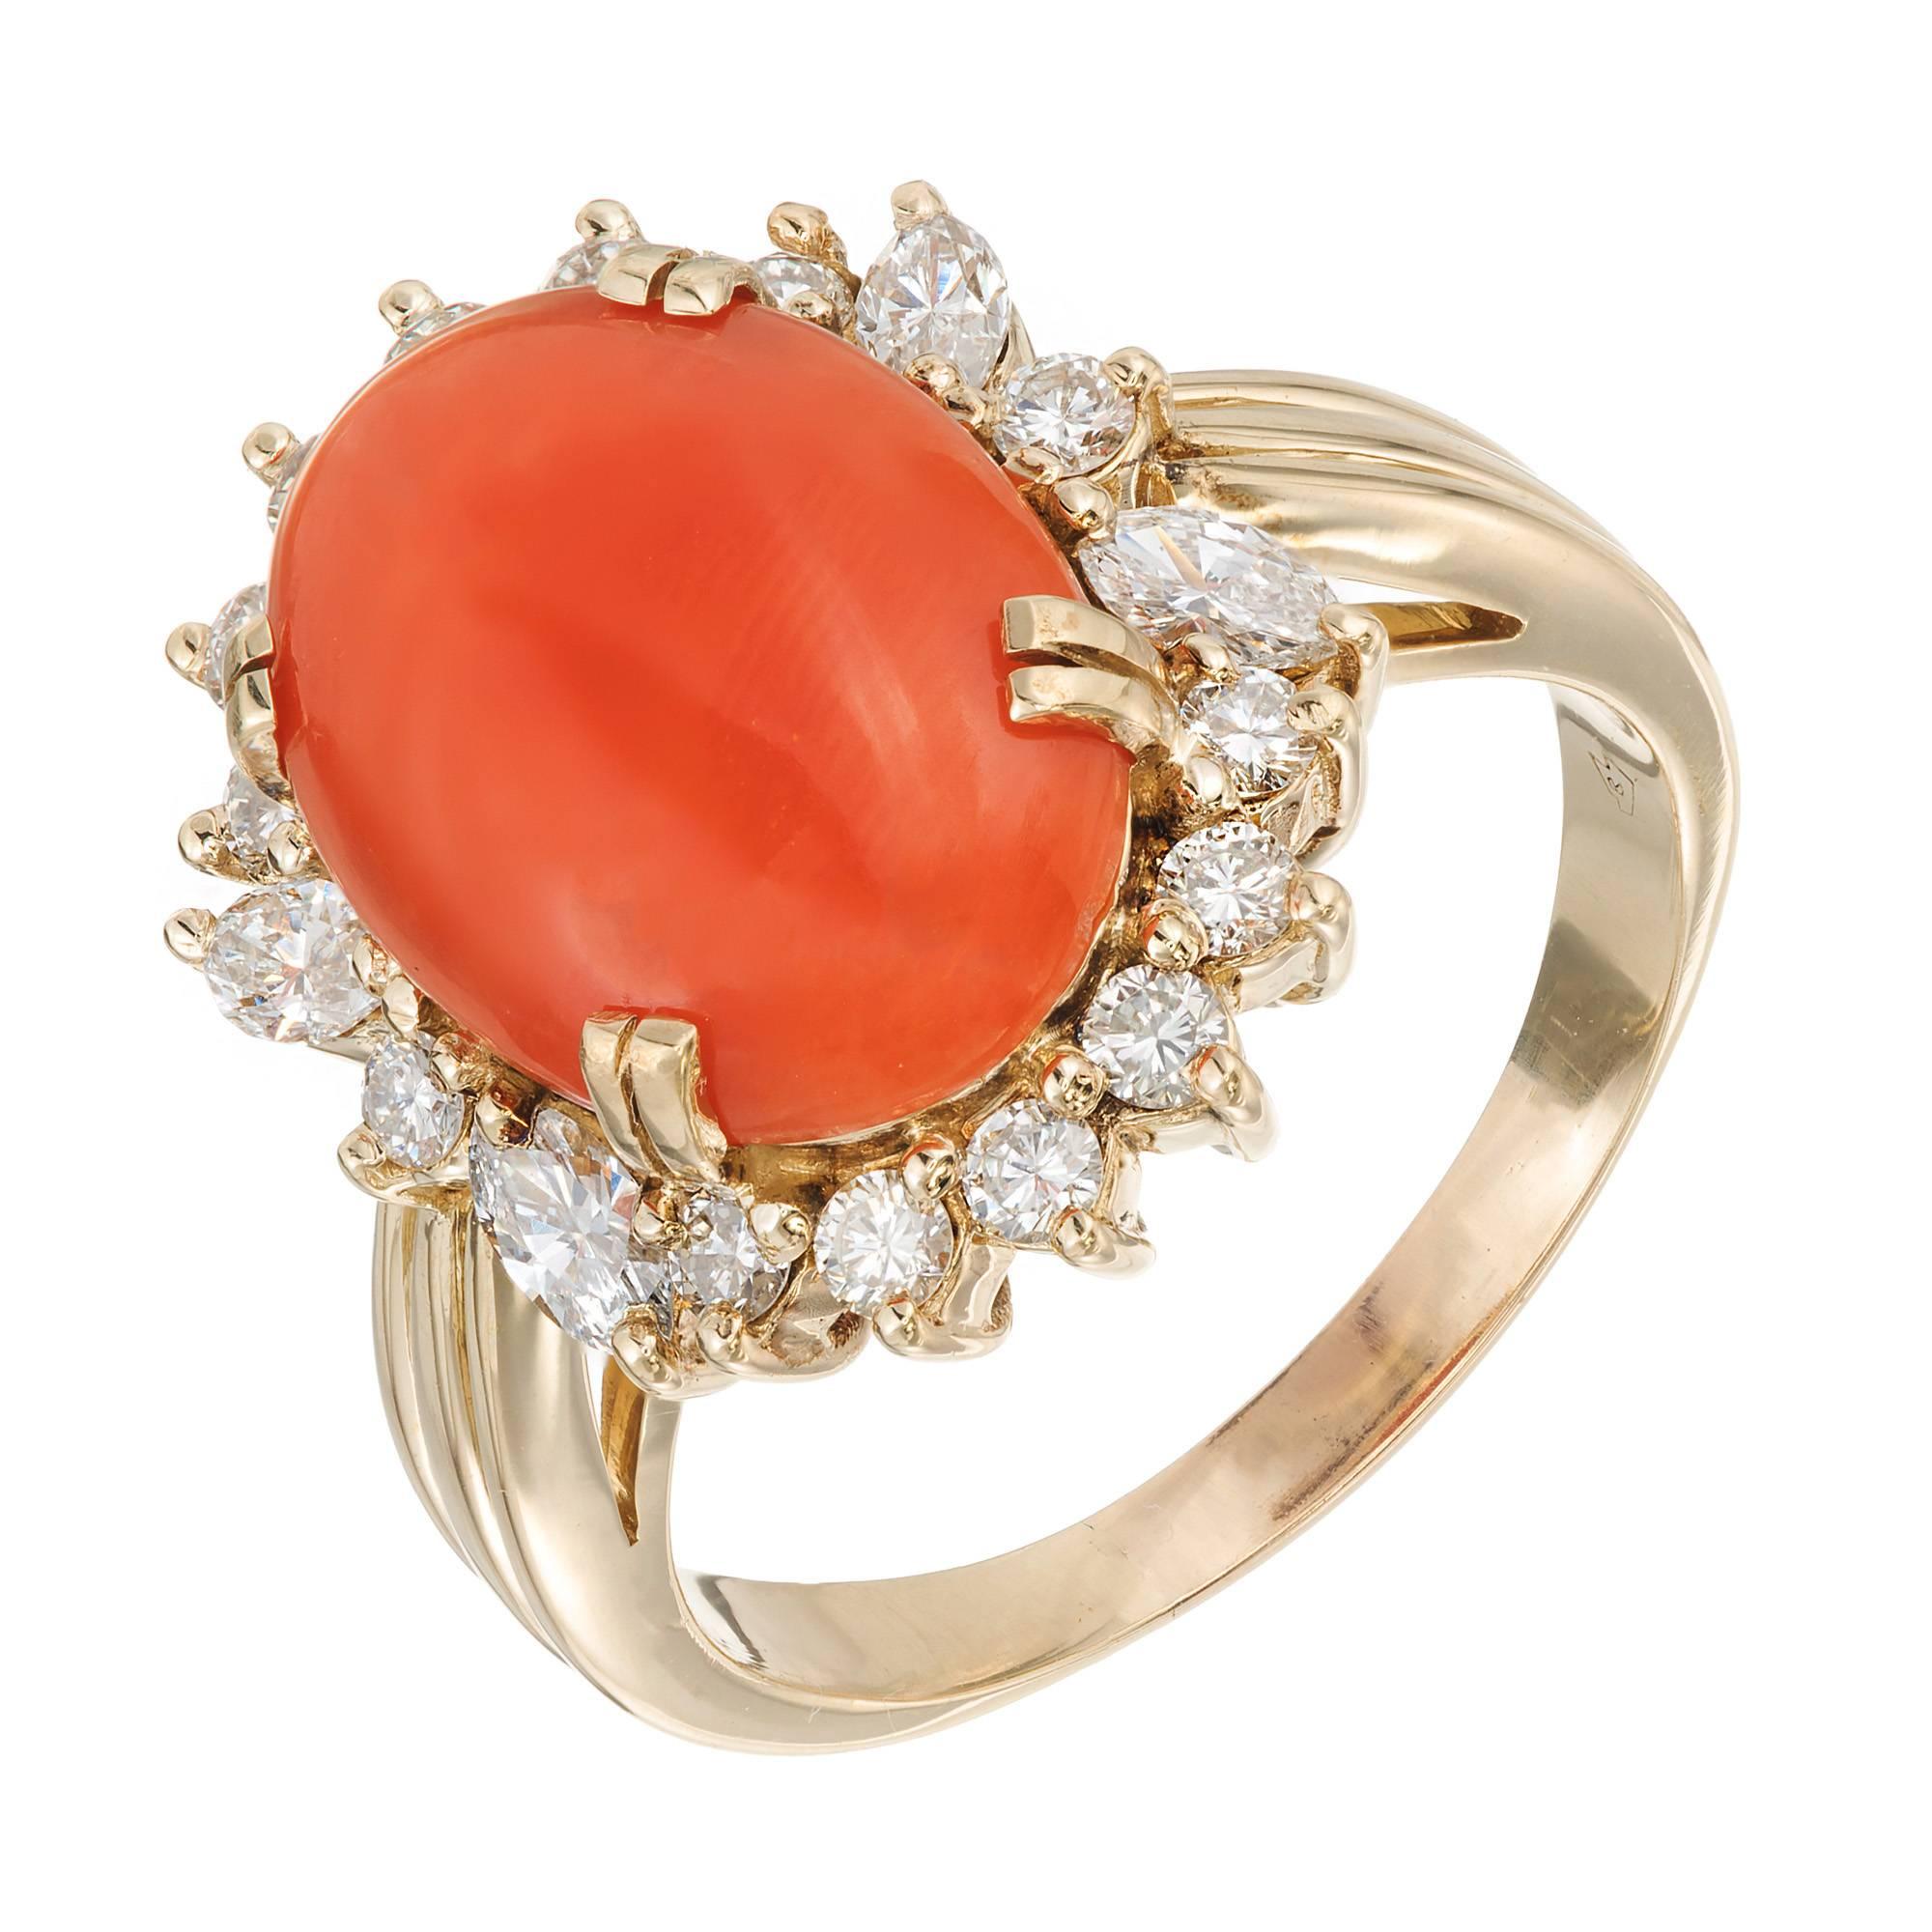 Mid-century polished GIA certified natural orange Coral and diamond cocktail ring. Surrounded by a halo of round and Marquise diamonds in a 14k yellow gold setting. 

14k yellow gold 
1 oval cabochon orange Coral 14.07 x 10.07 x 3.45mm
14 round full